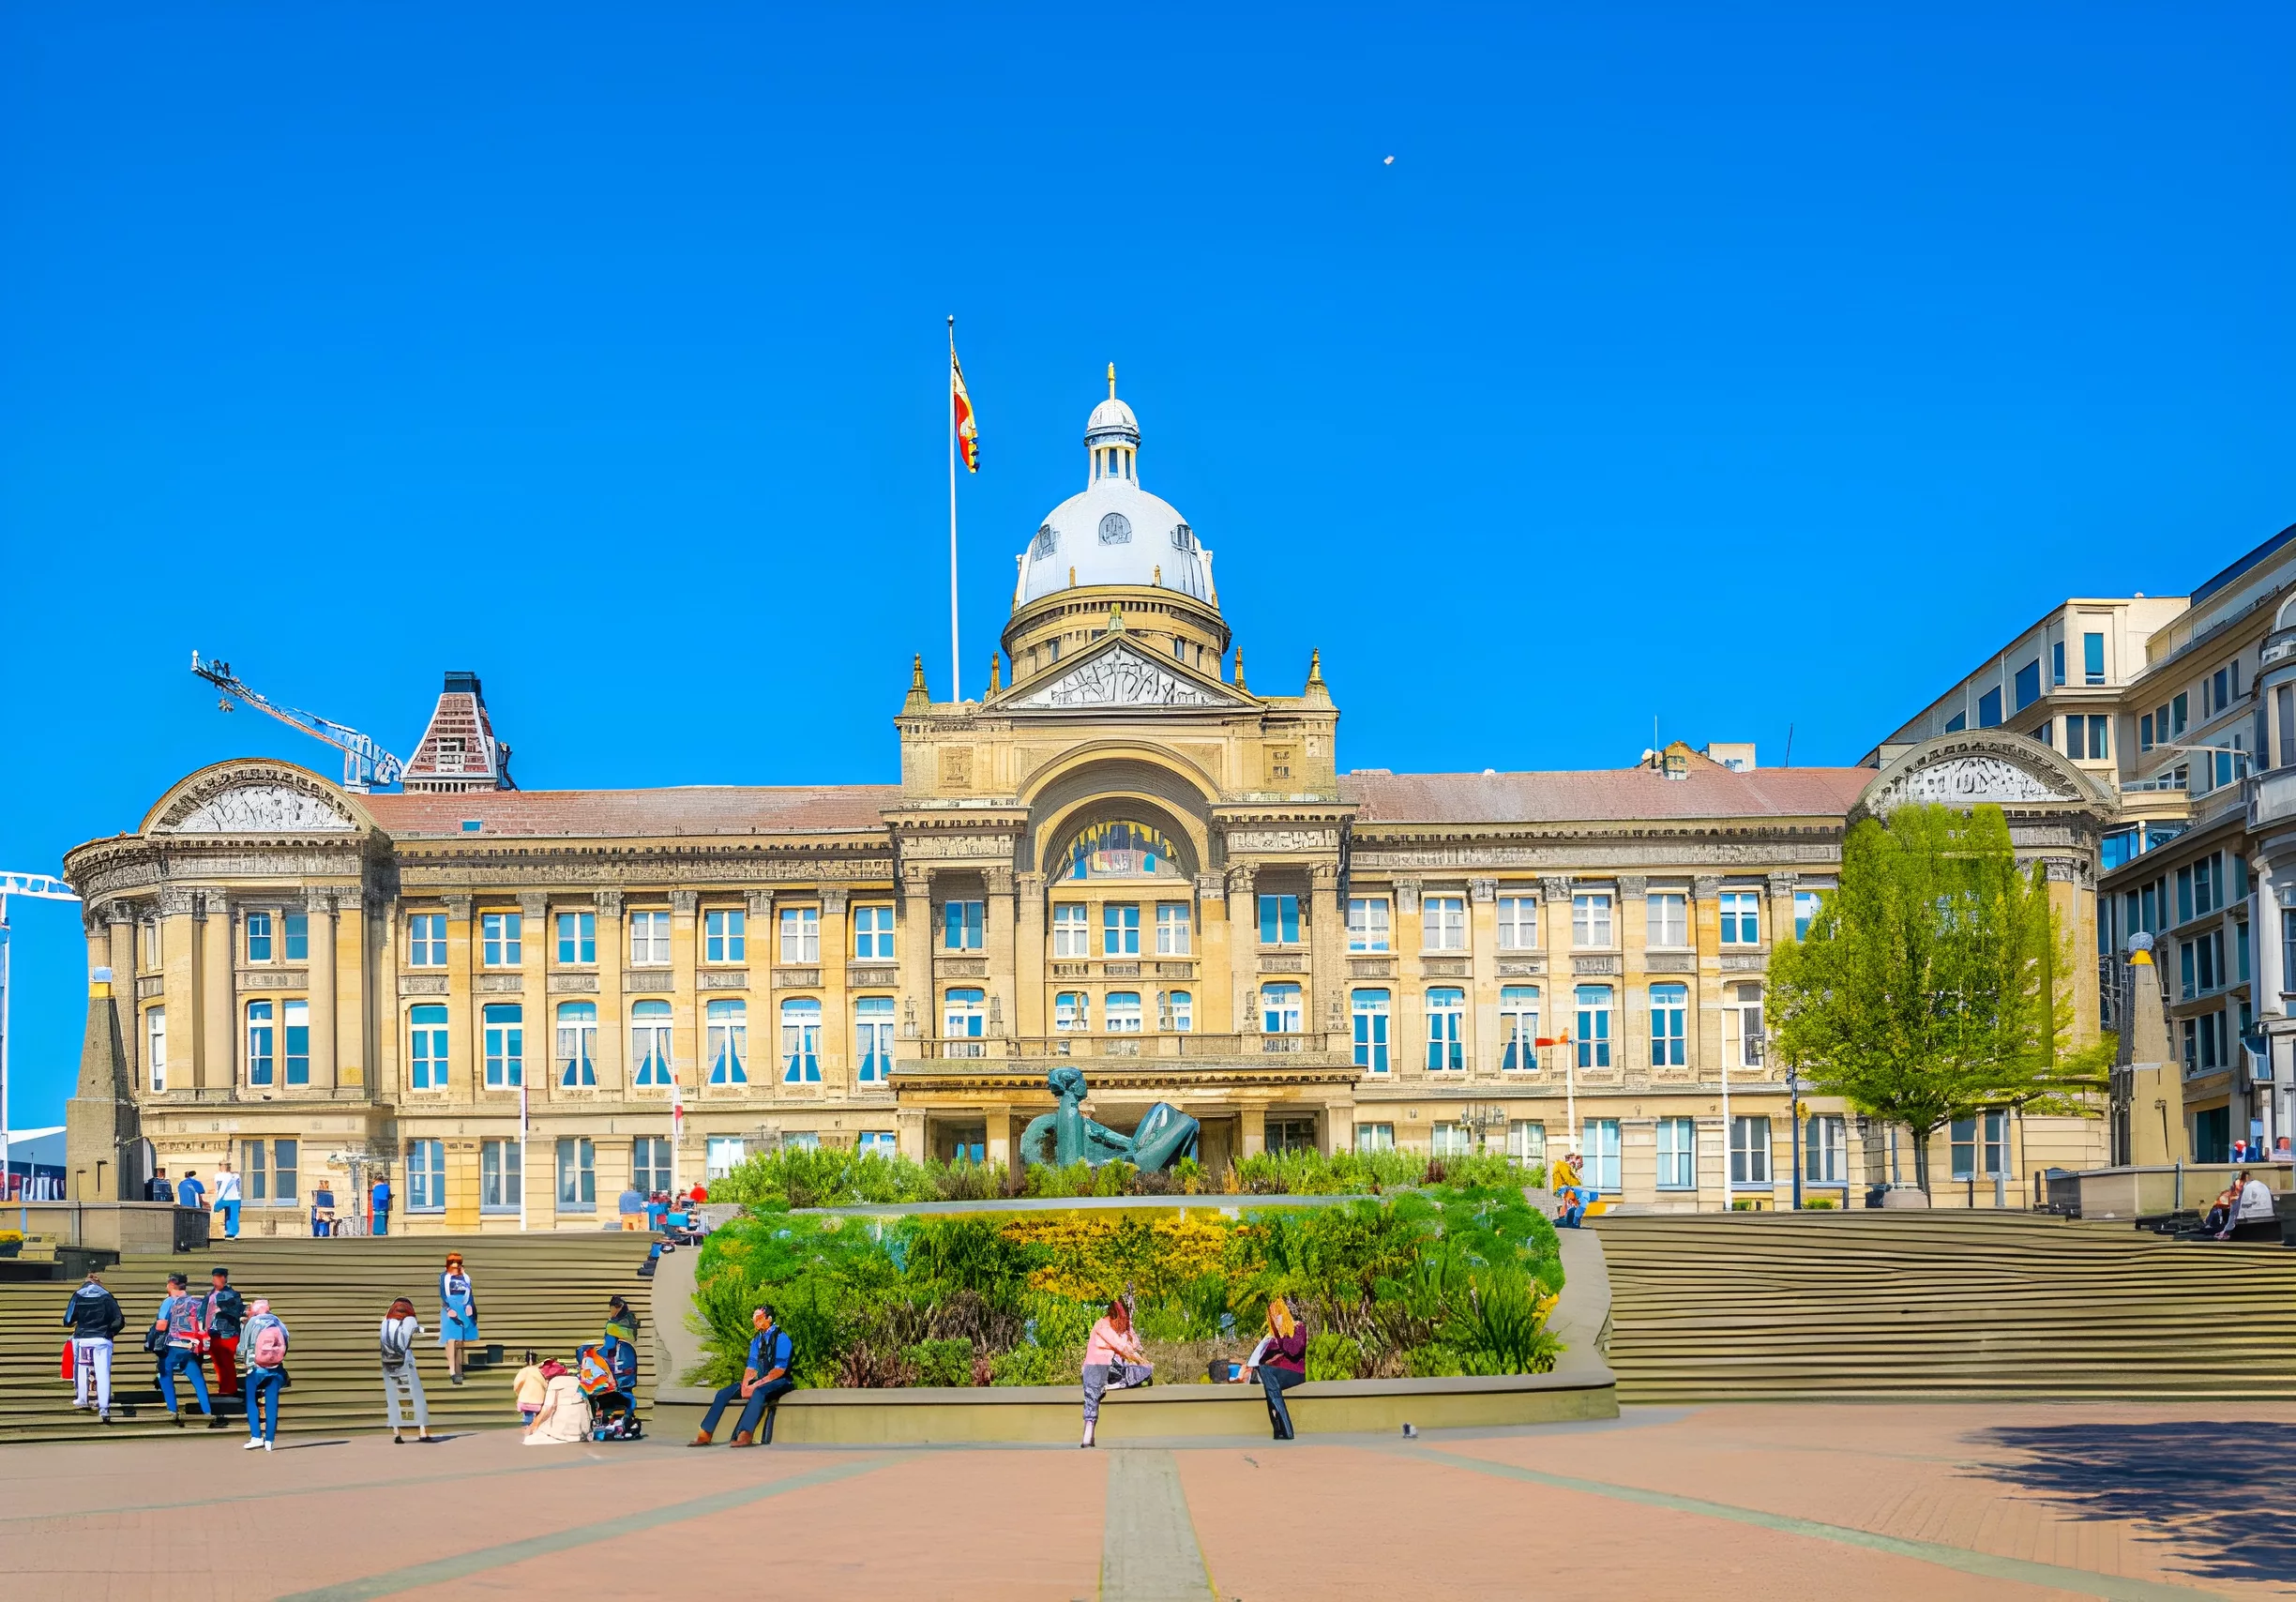 Birmingham museums for history buffs